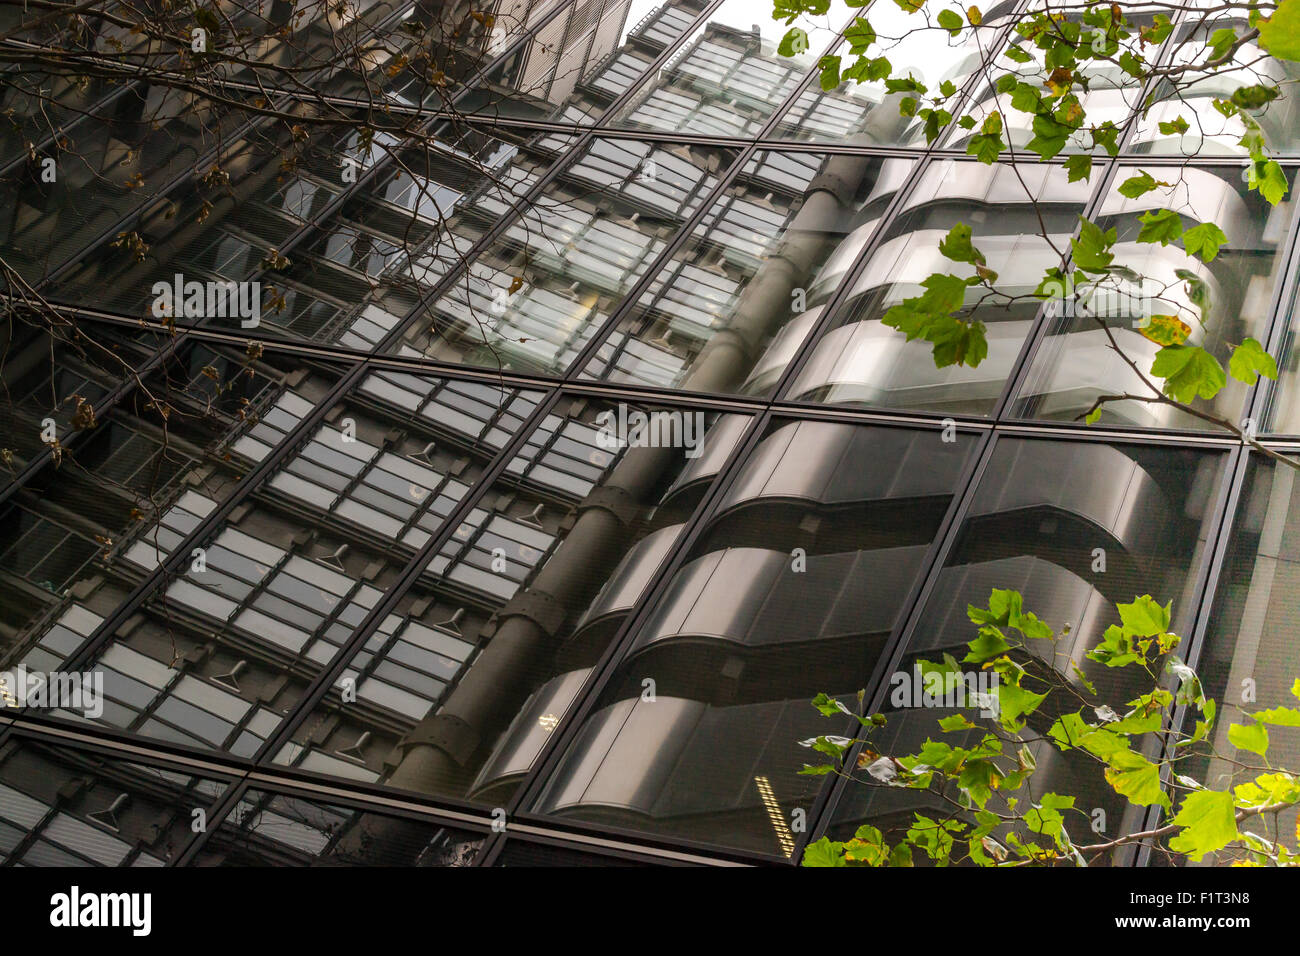 Futuristic modern building abstract with curving building glass windows with green leaves in foreground with nobody visible Stock Photo